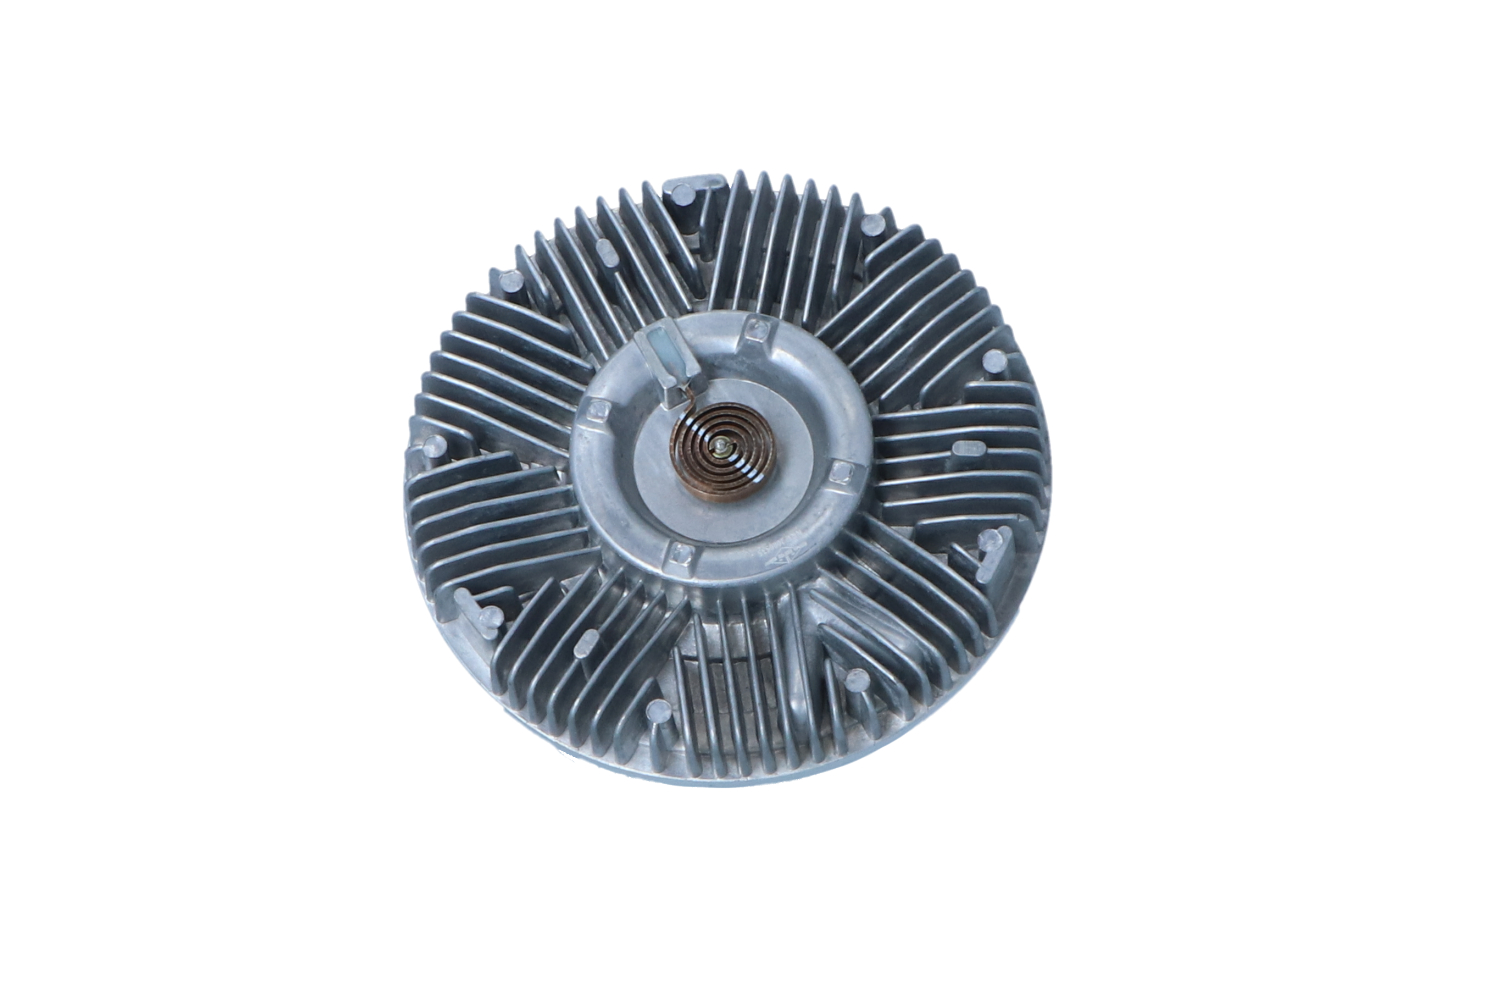 NRF 49596 Fan clutch DODGE experience and price